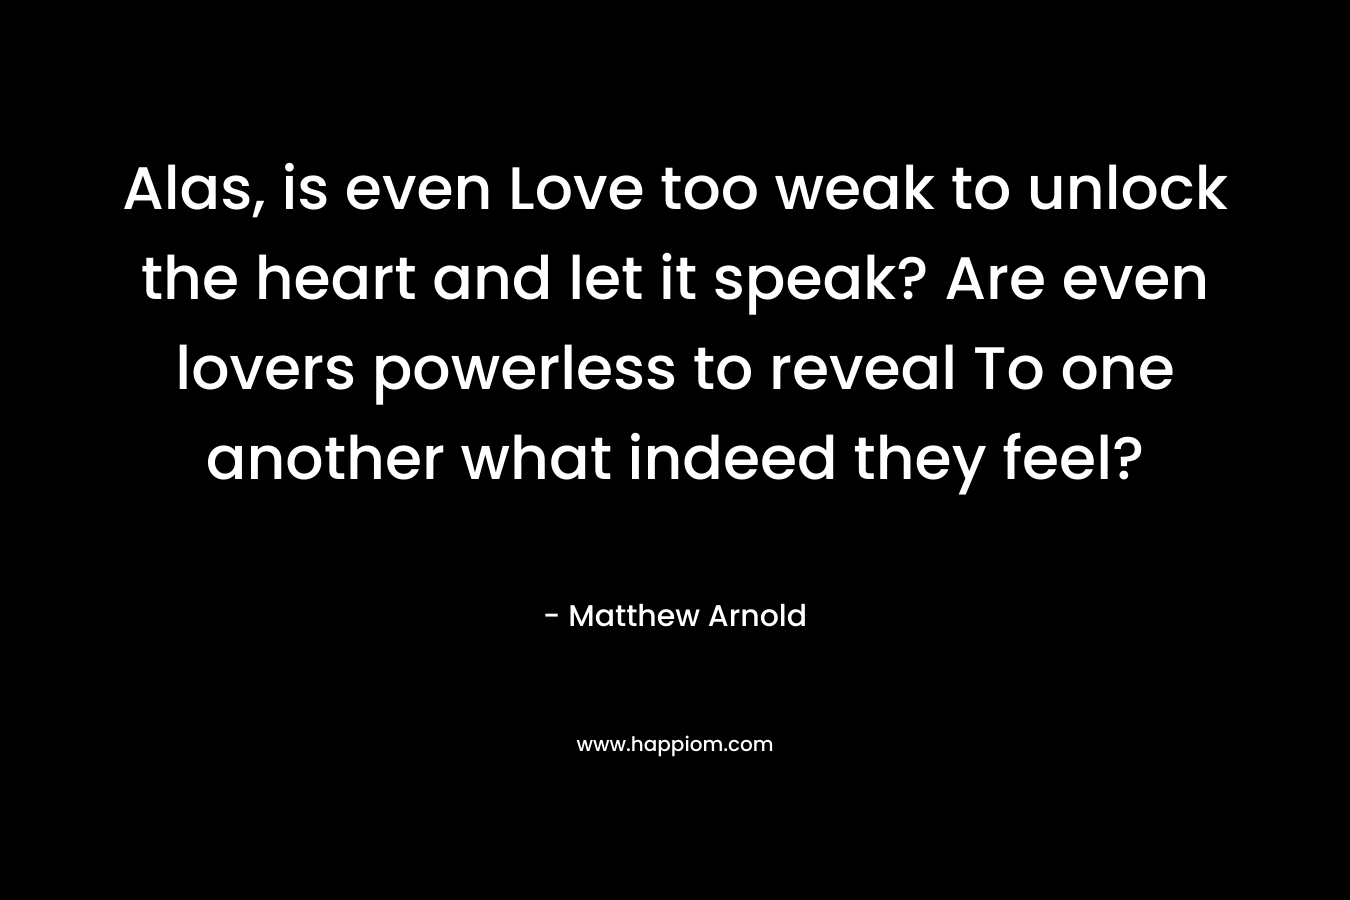 Alas, is even Love too weak to unlock the heart and let it speak? Are even lovers powerless to reveal To one another what indeed they feel? – Matthew Arnold